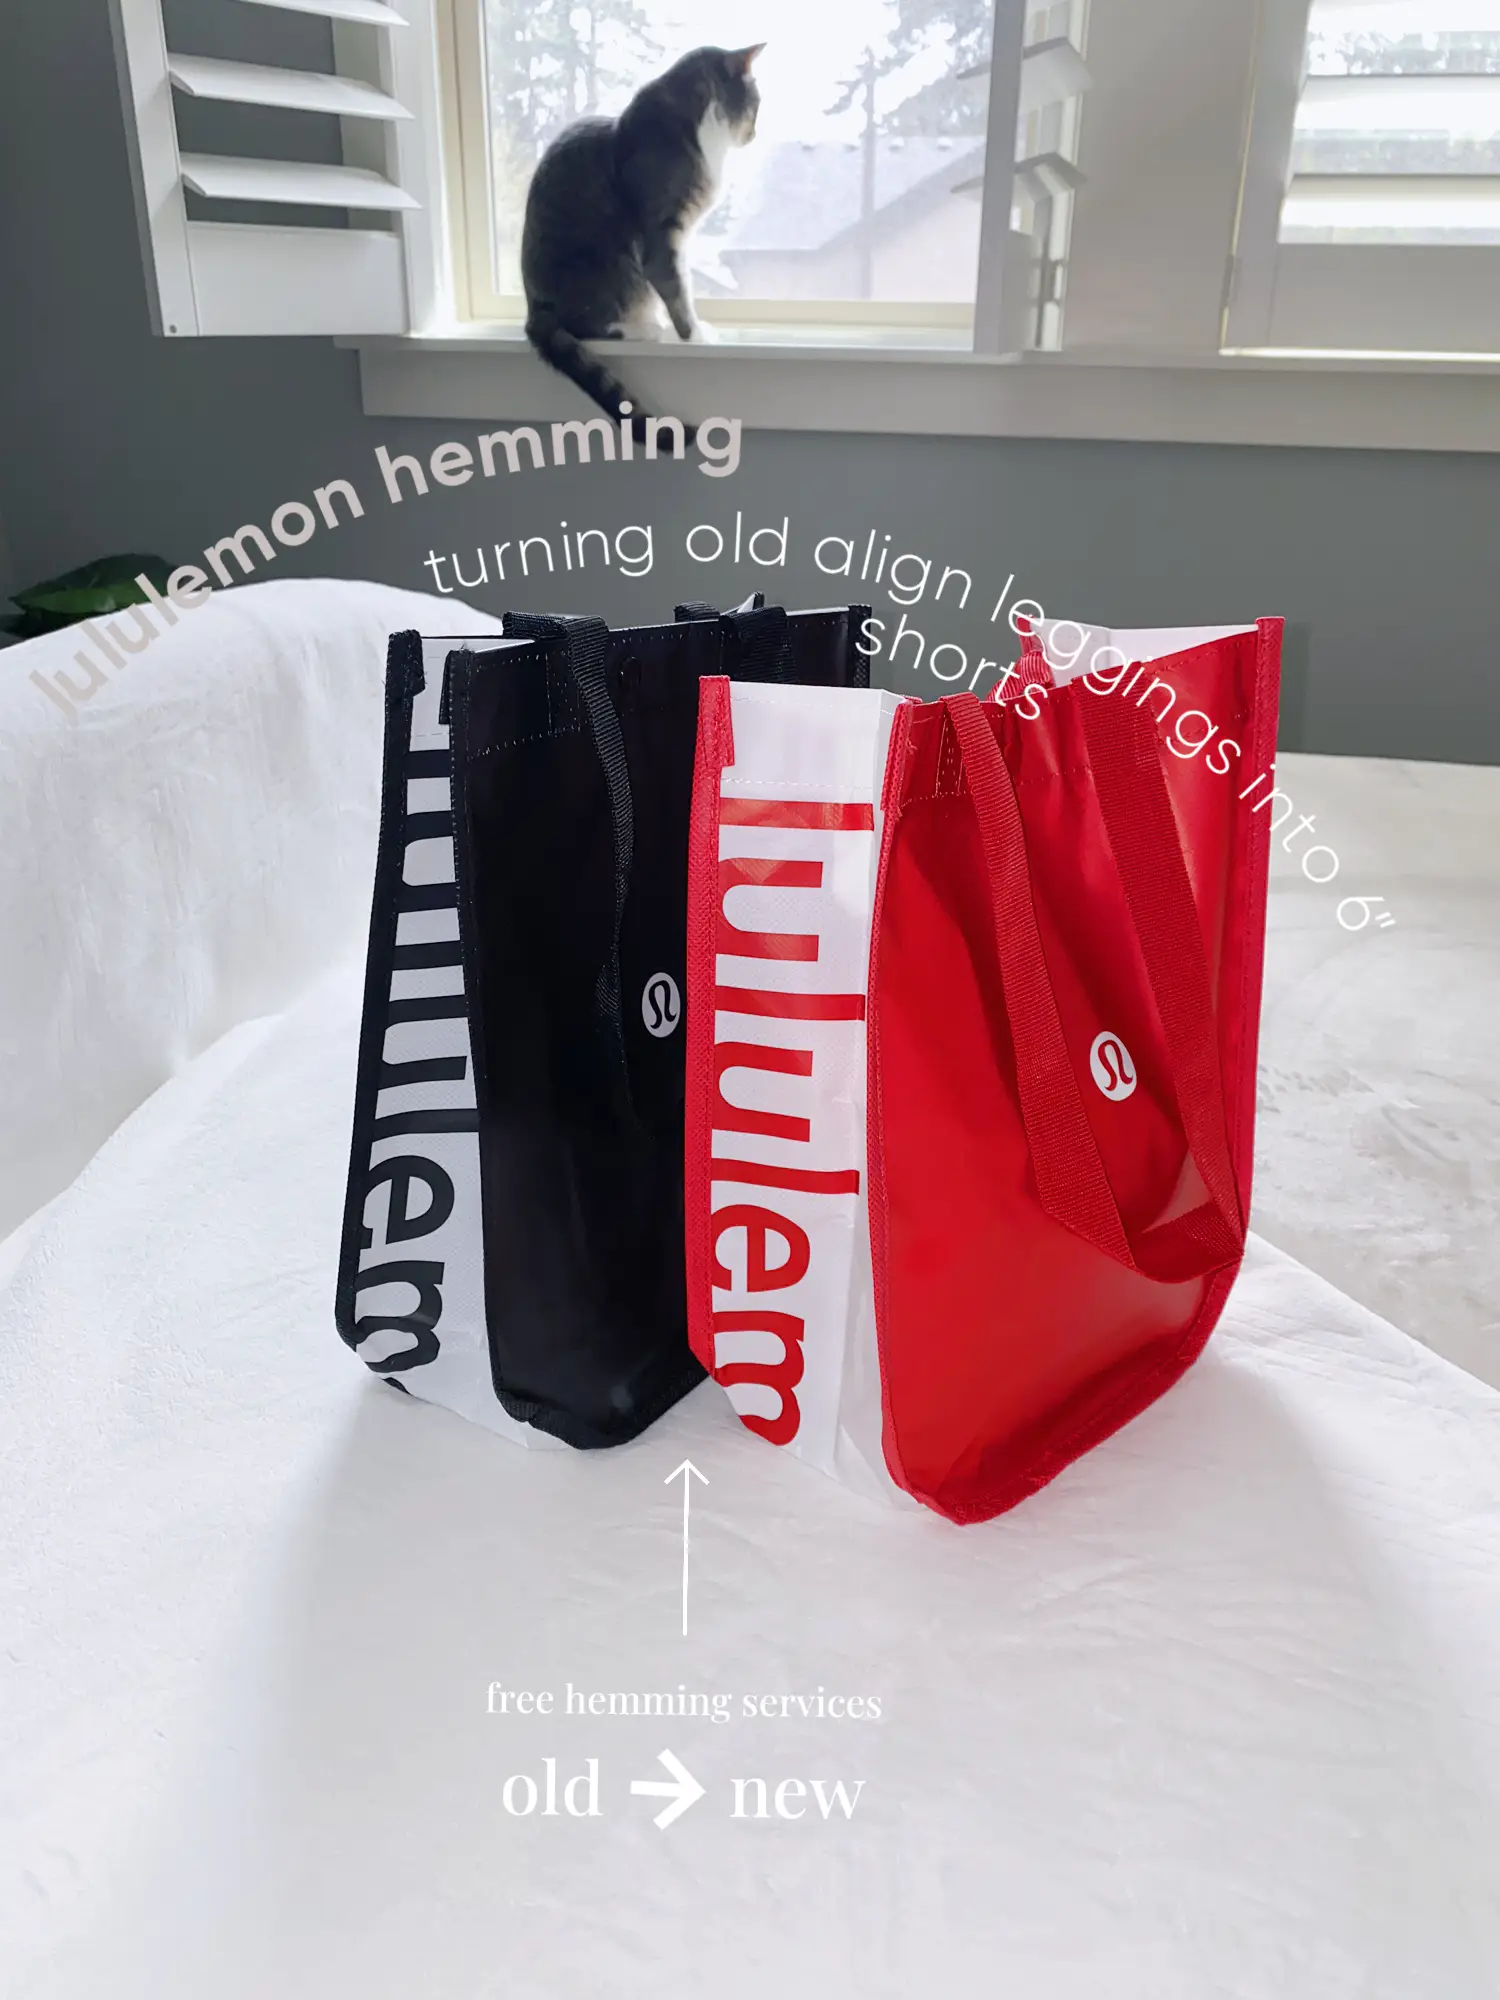 lululemon free hemming service 🍋, Gallery posted by Solena Seng